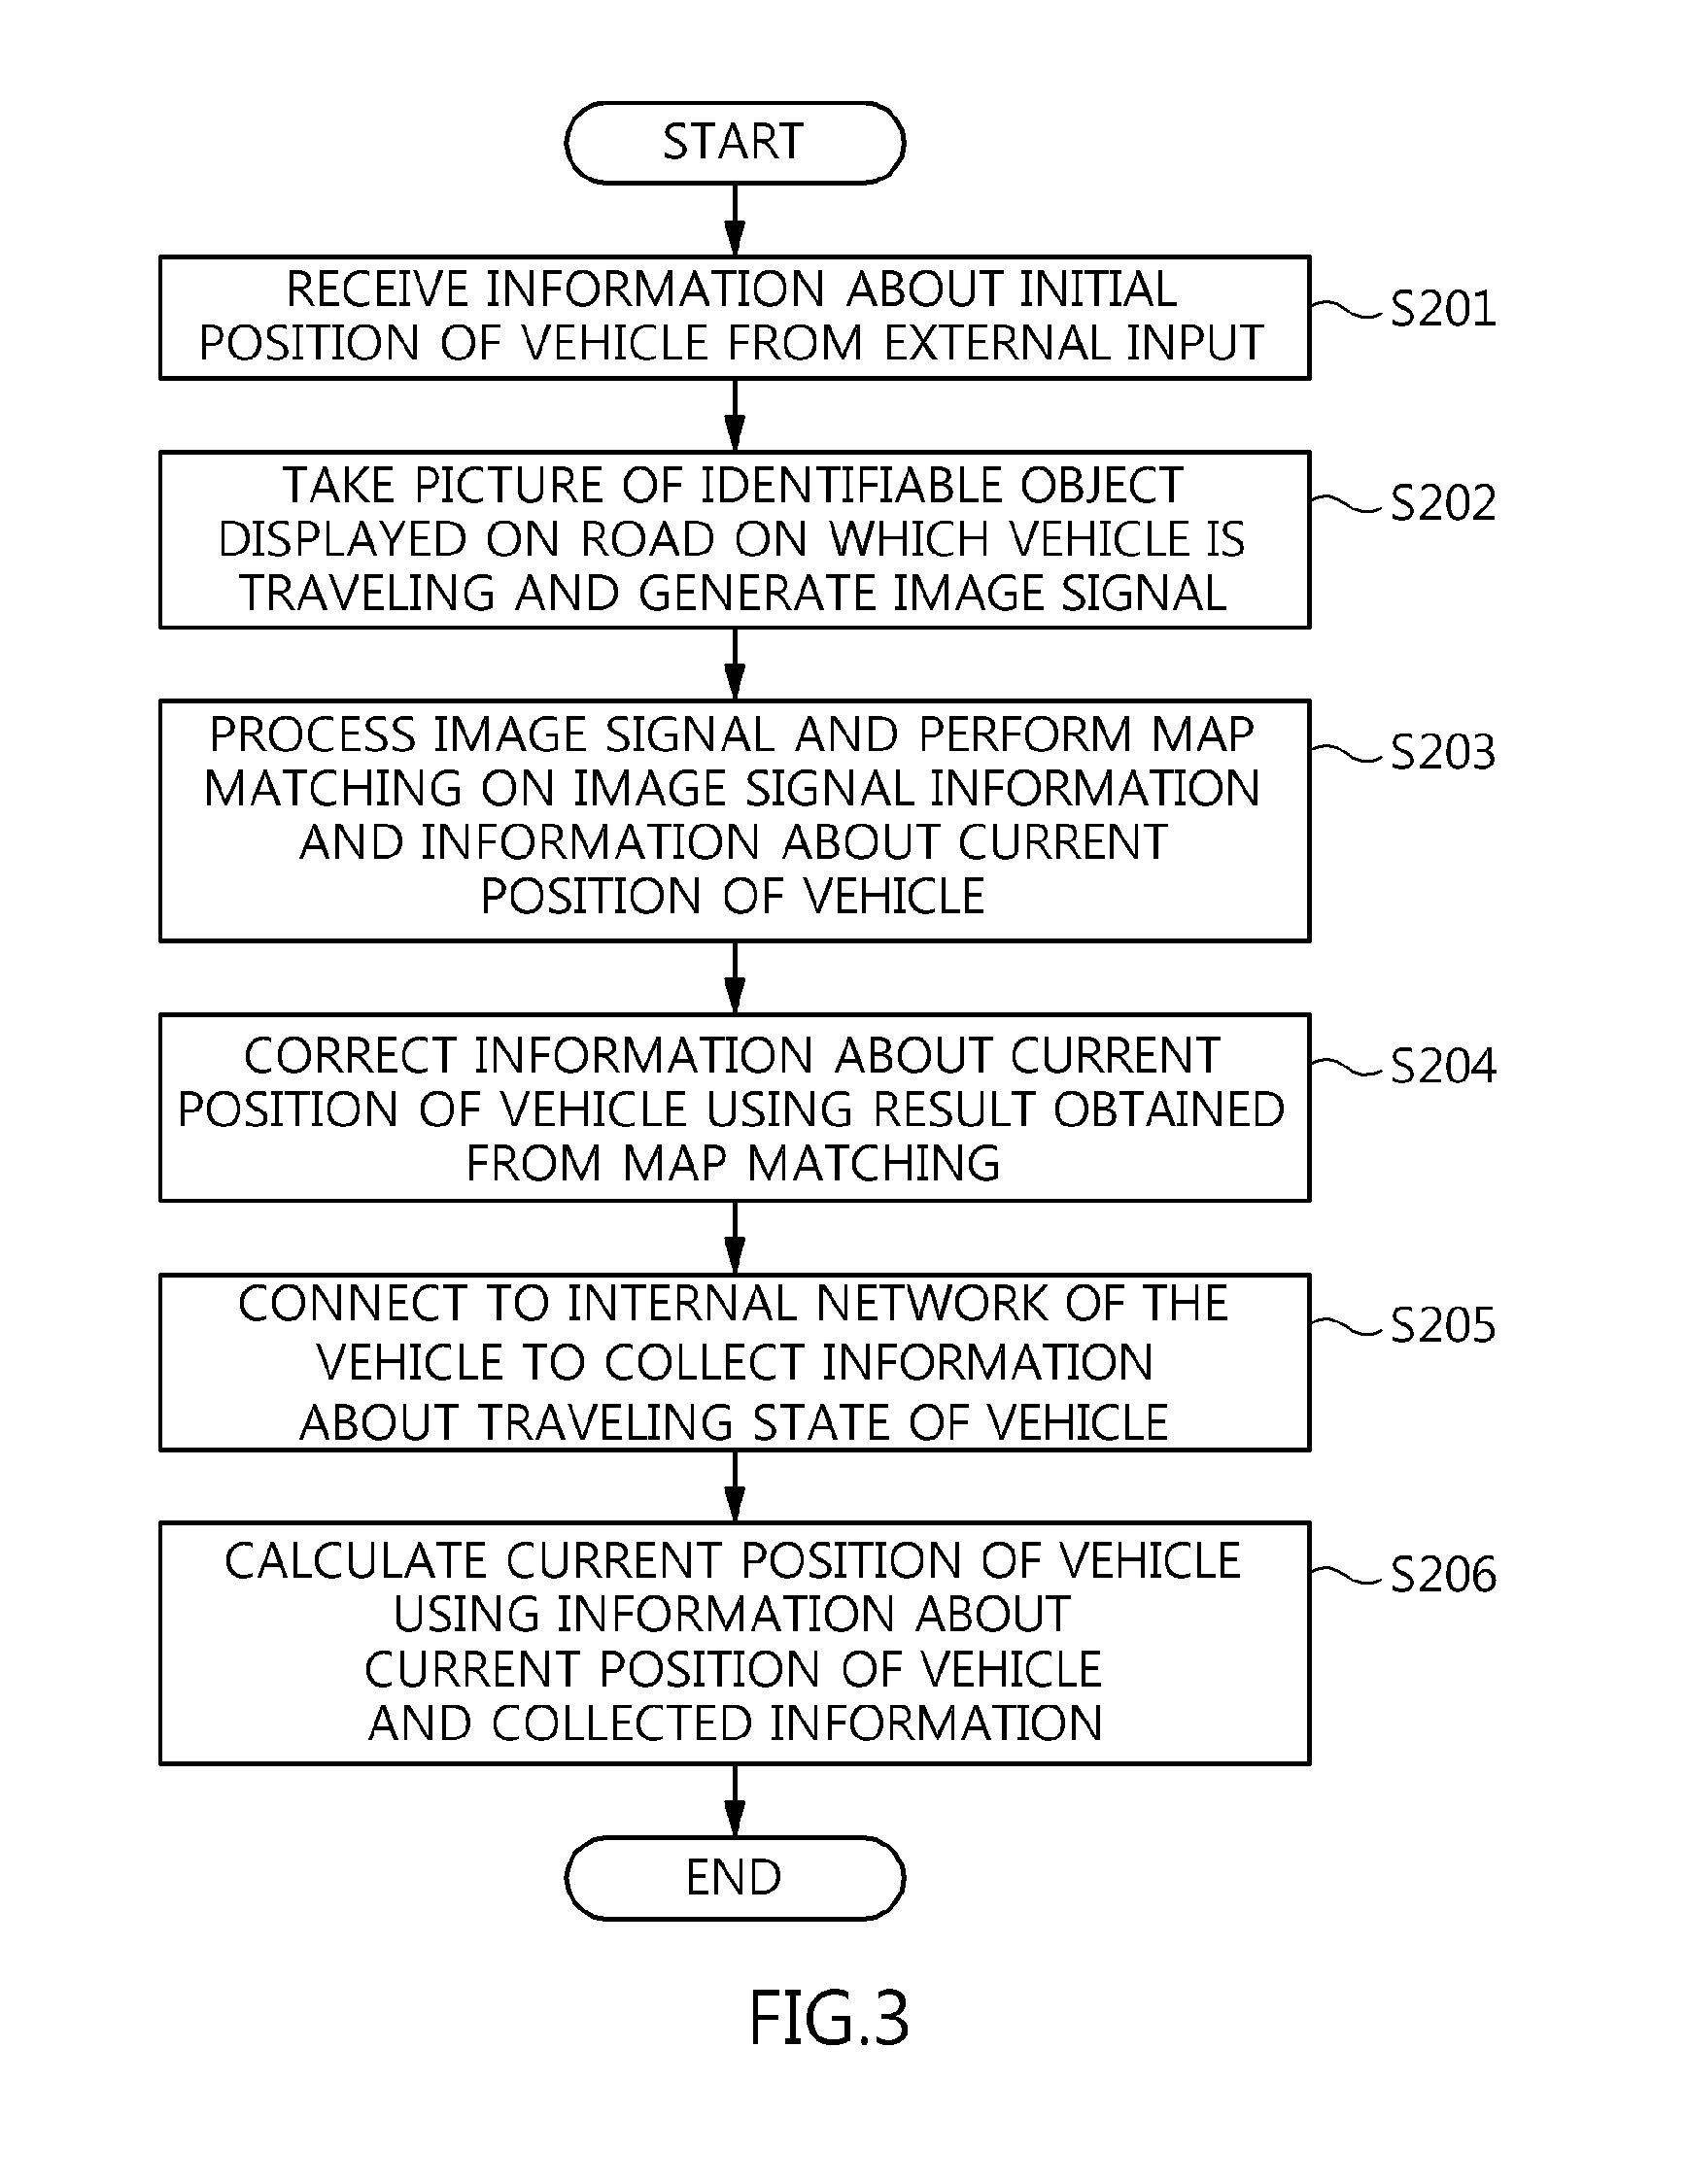 Apparatus and method for recognizing current position of vehicle using internal network of the vehicle and image sensor